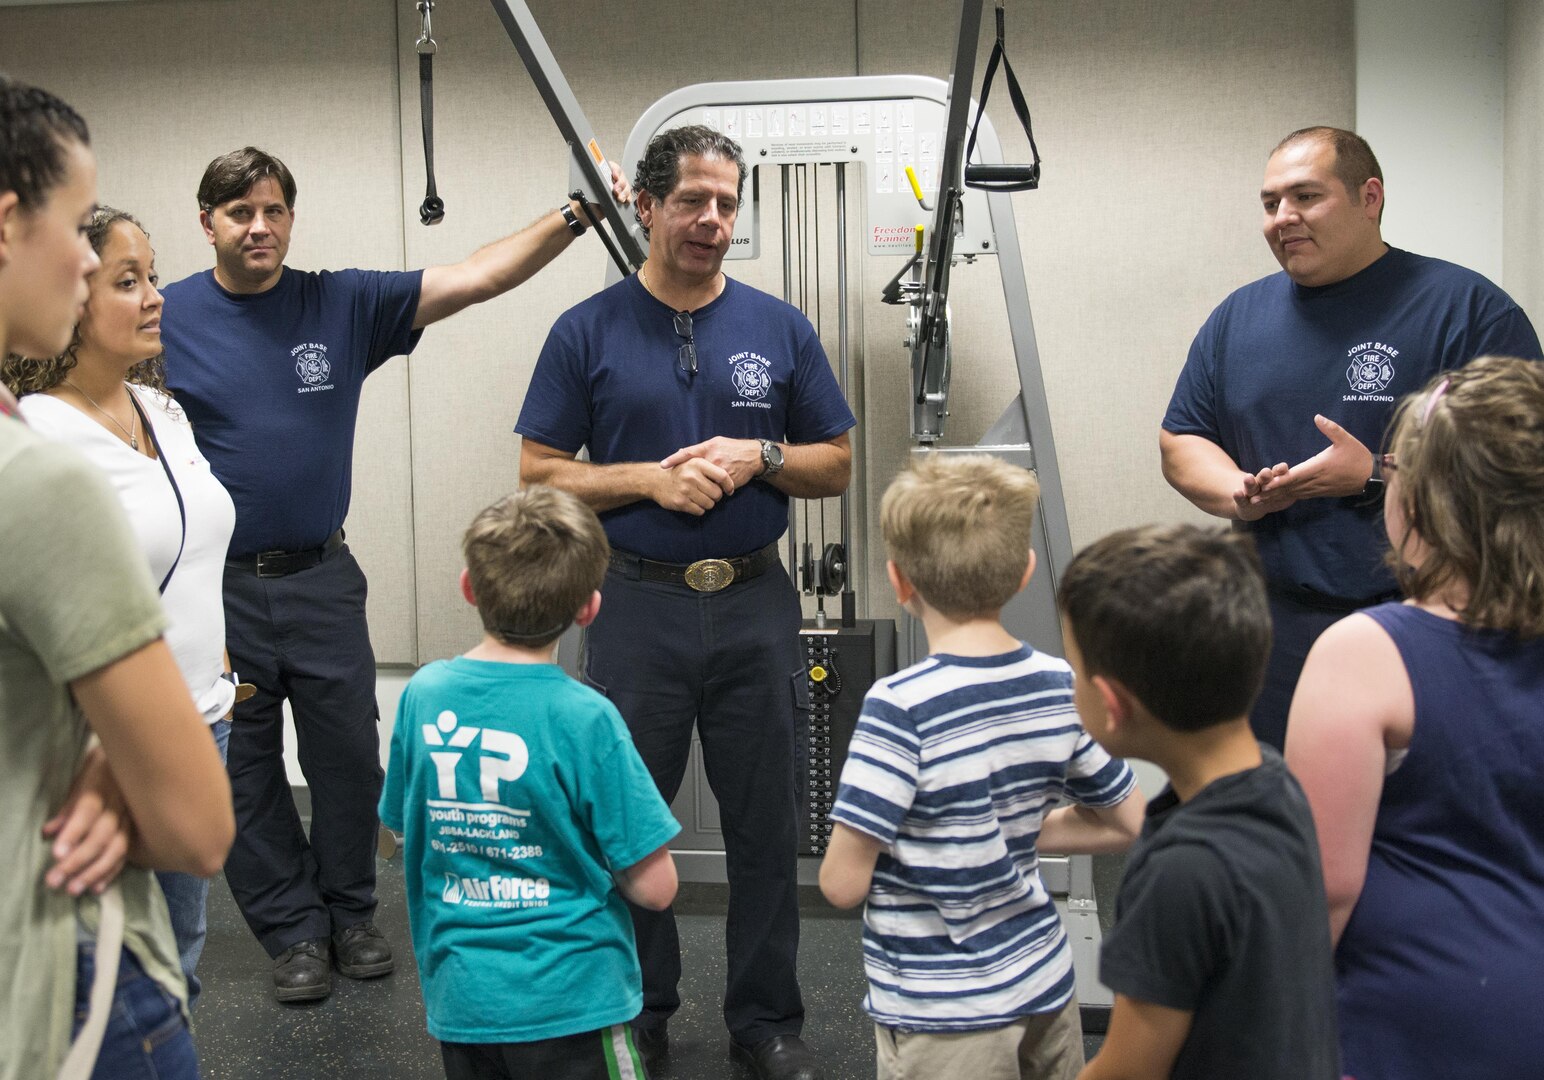 (From the left) Thomas Russ, Michael Martinez, and Jeffery Pardo, 502nd Civil Engineering Squadron firefighters, shows children from Vibrant ABA Solutions their workout room during a open house tour of Fire Station 2 June 23, 2017, at Joint Base San Antonio-Lackland, Texas. One of the goals of hosting tour is to make children more comfortable with firefighters so they won’t be frightened during an emergency. (U.S. Air Force photo by Senior Airman Krystal Wright)